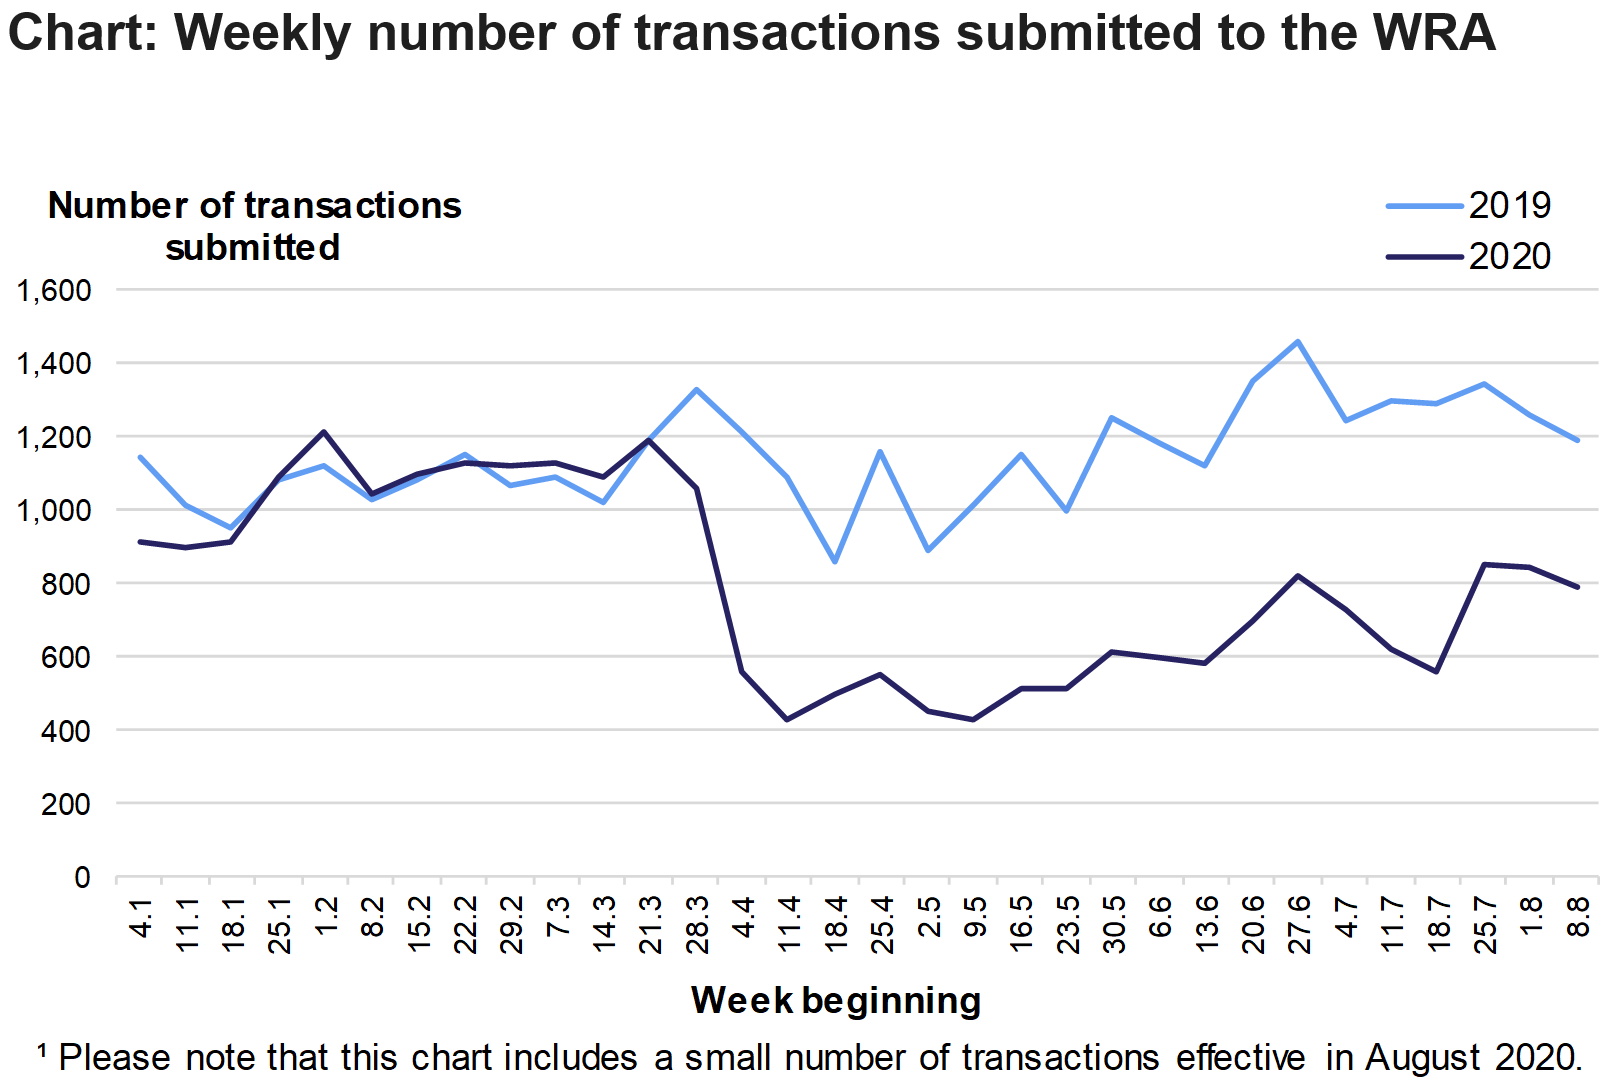 The chart shows the number of residential and non-residential transactions submitted to the WRA each week from January to August, in 2019 and 2020. Please note that this chart includes a small number of transactions effective in August 2020.